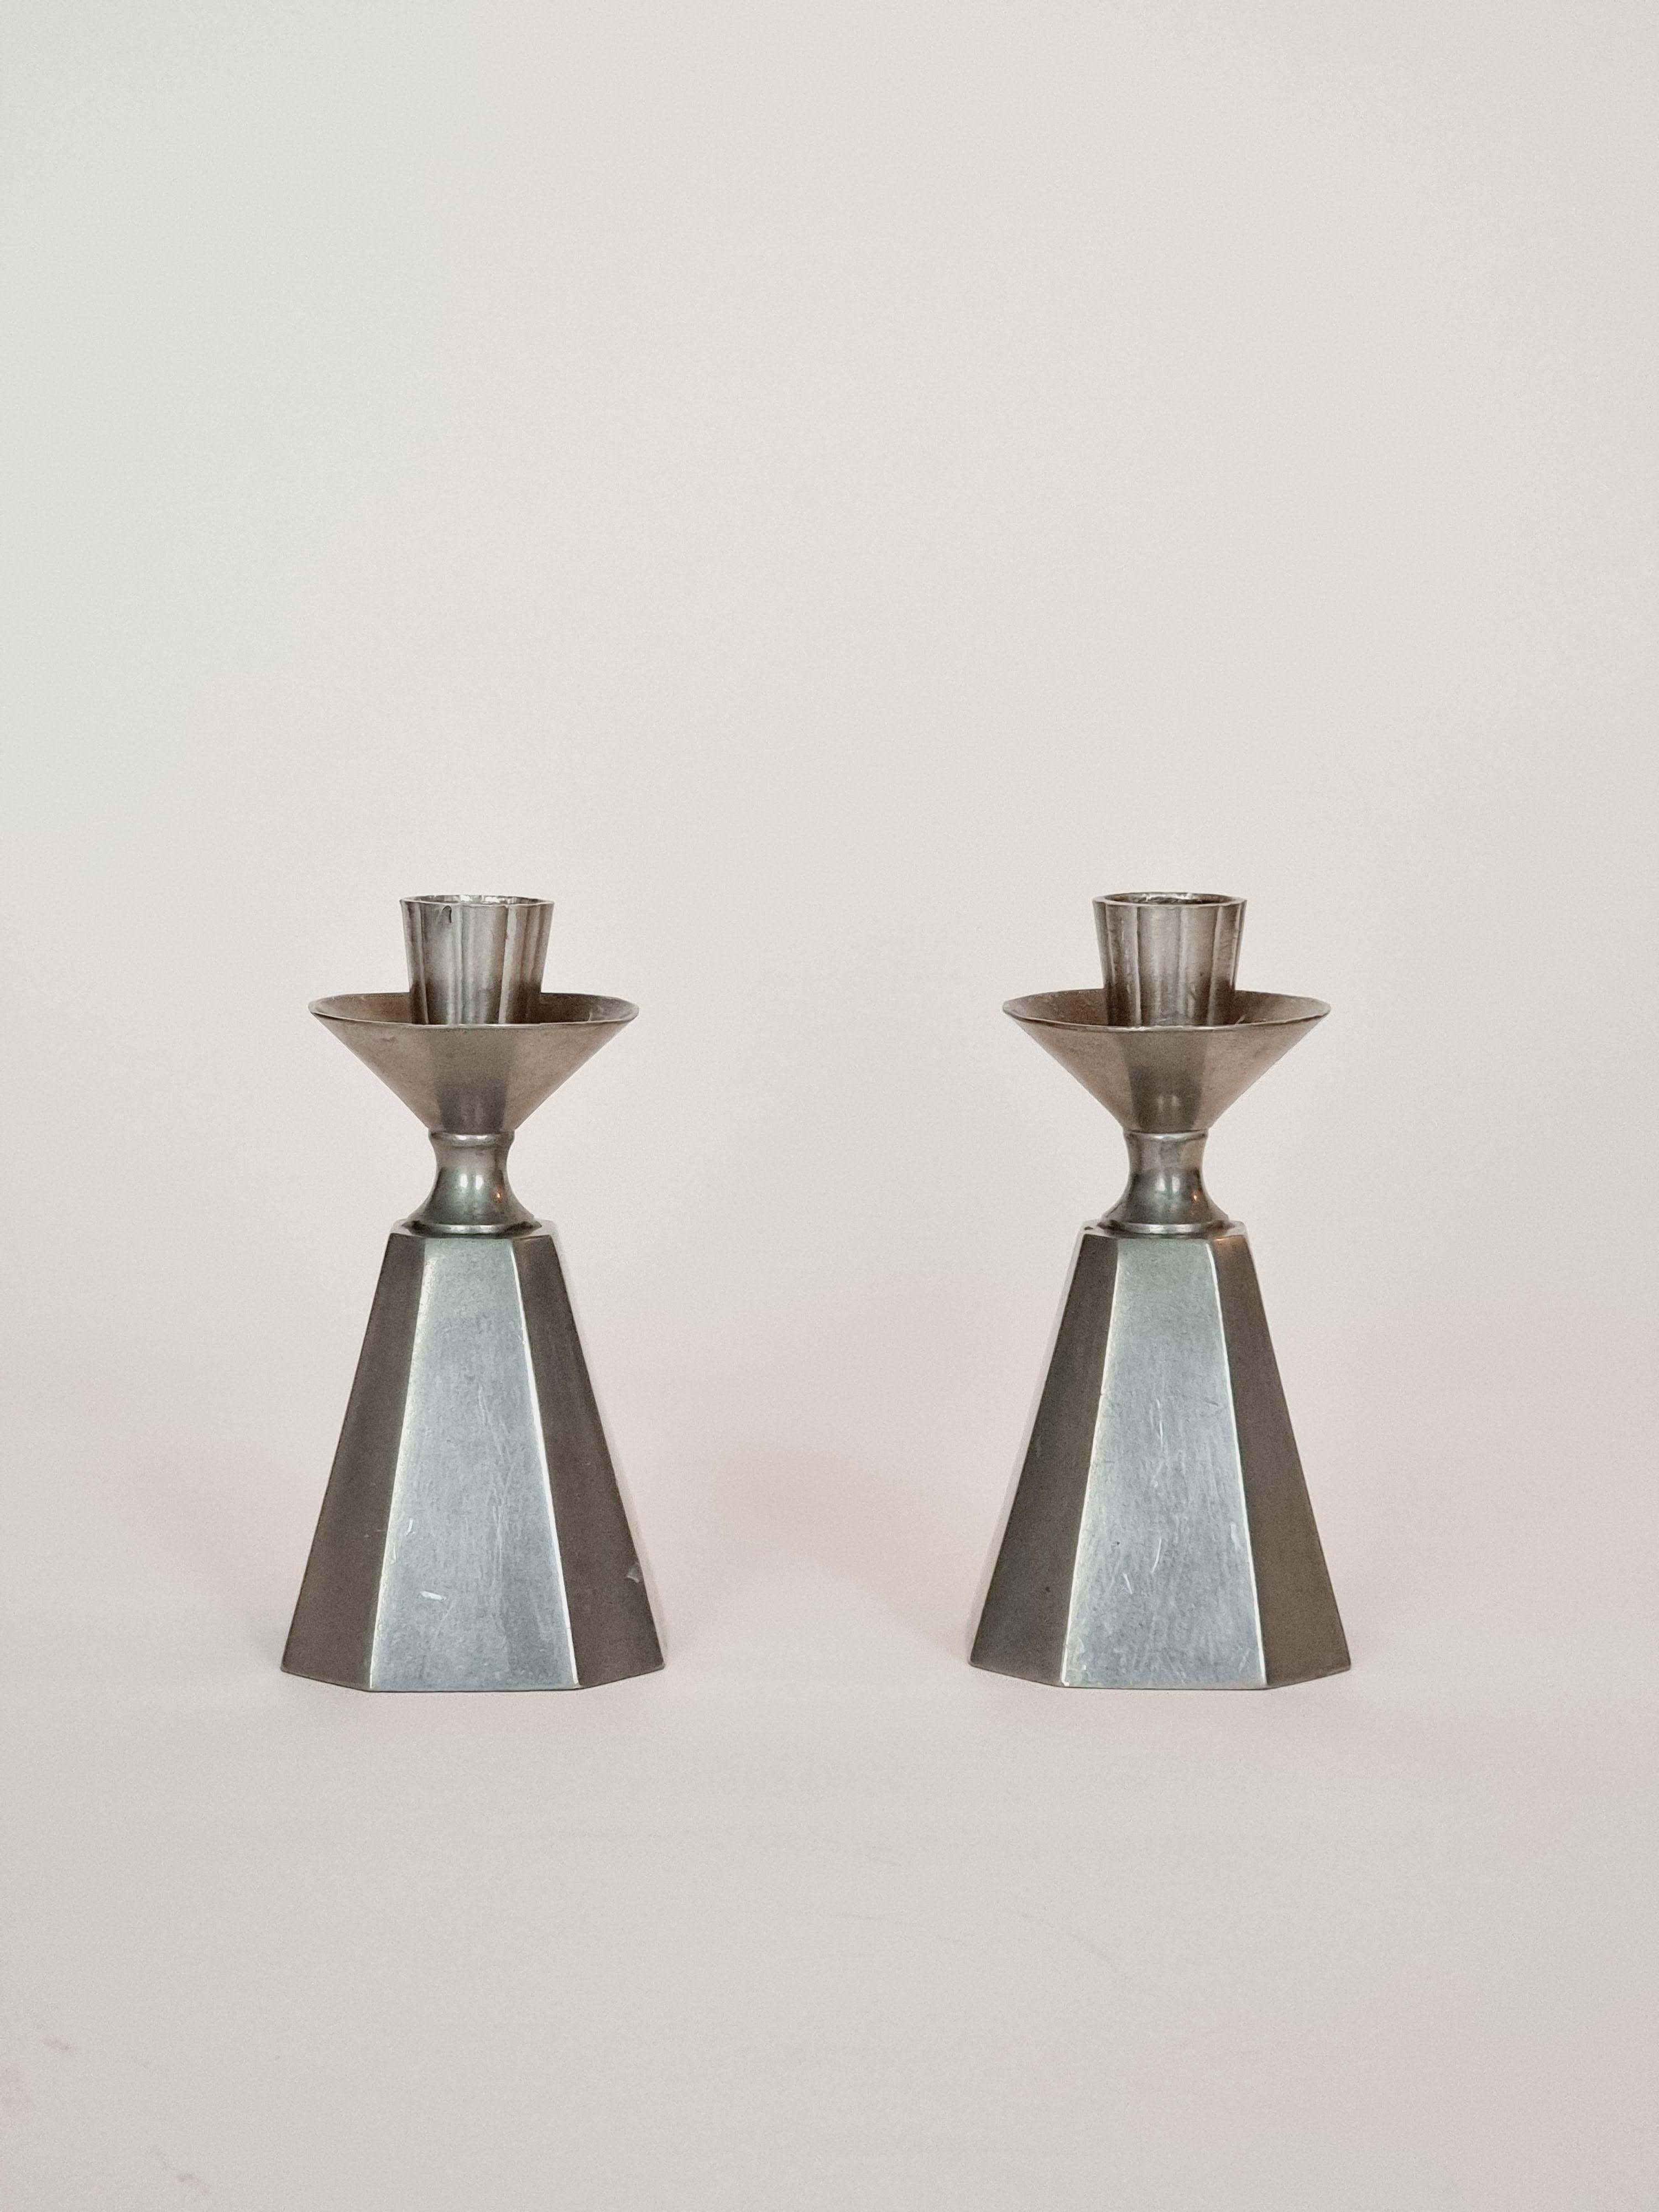 A pair of timeless, stylish pewter candlesticks by Guldaktiebolaget / GAB Tenn, Sweden 1962 (M9). 

True estetic of Swedish Modern with its beautiful strict design, works in most rooms and with most styles. 

Smaller/normal signs of age and wear. 

